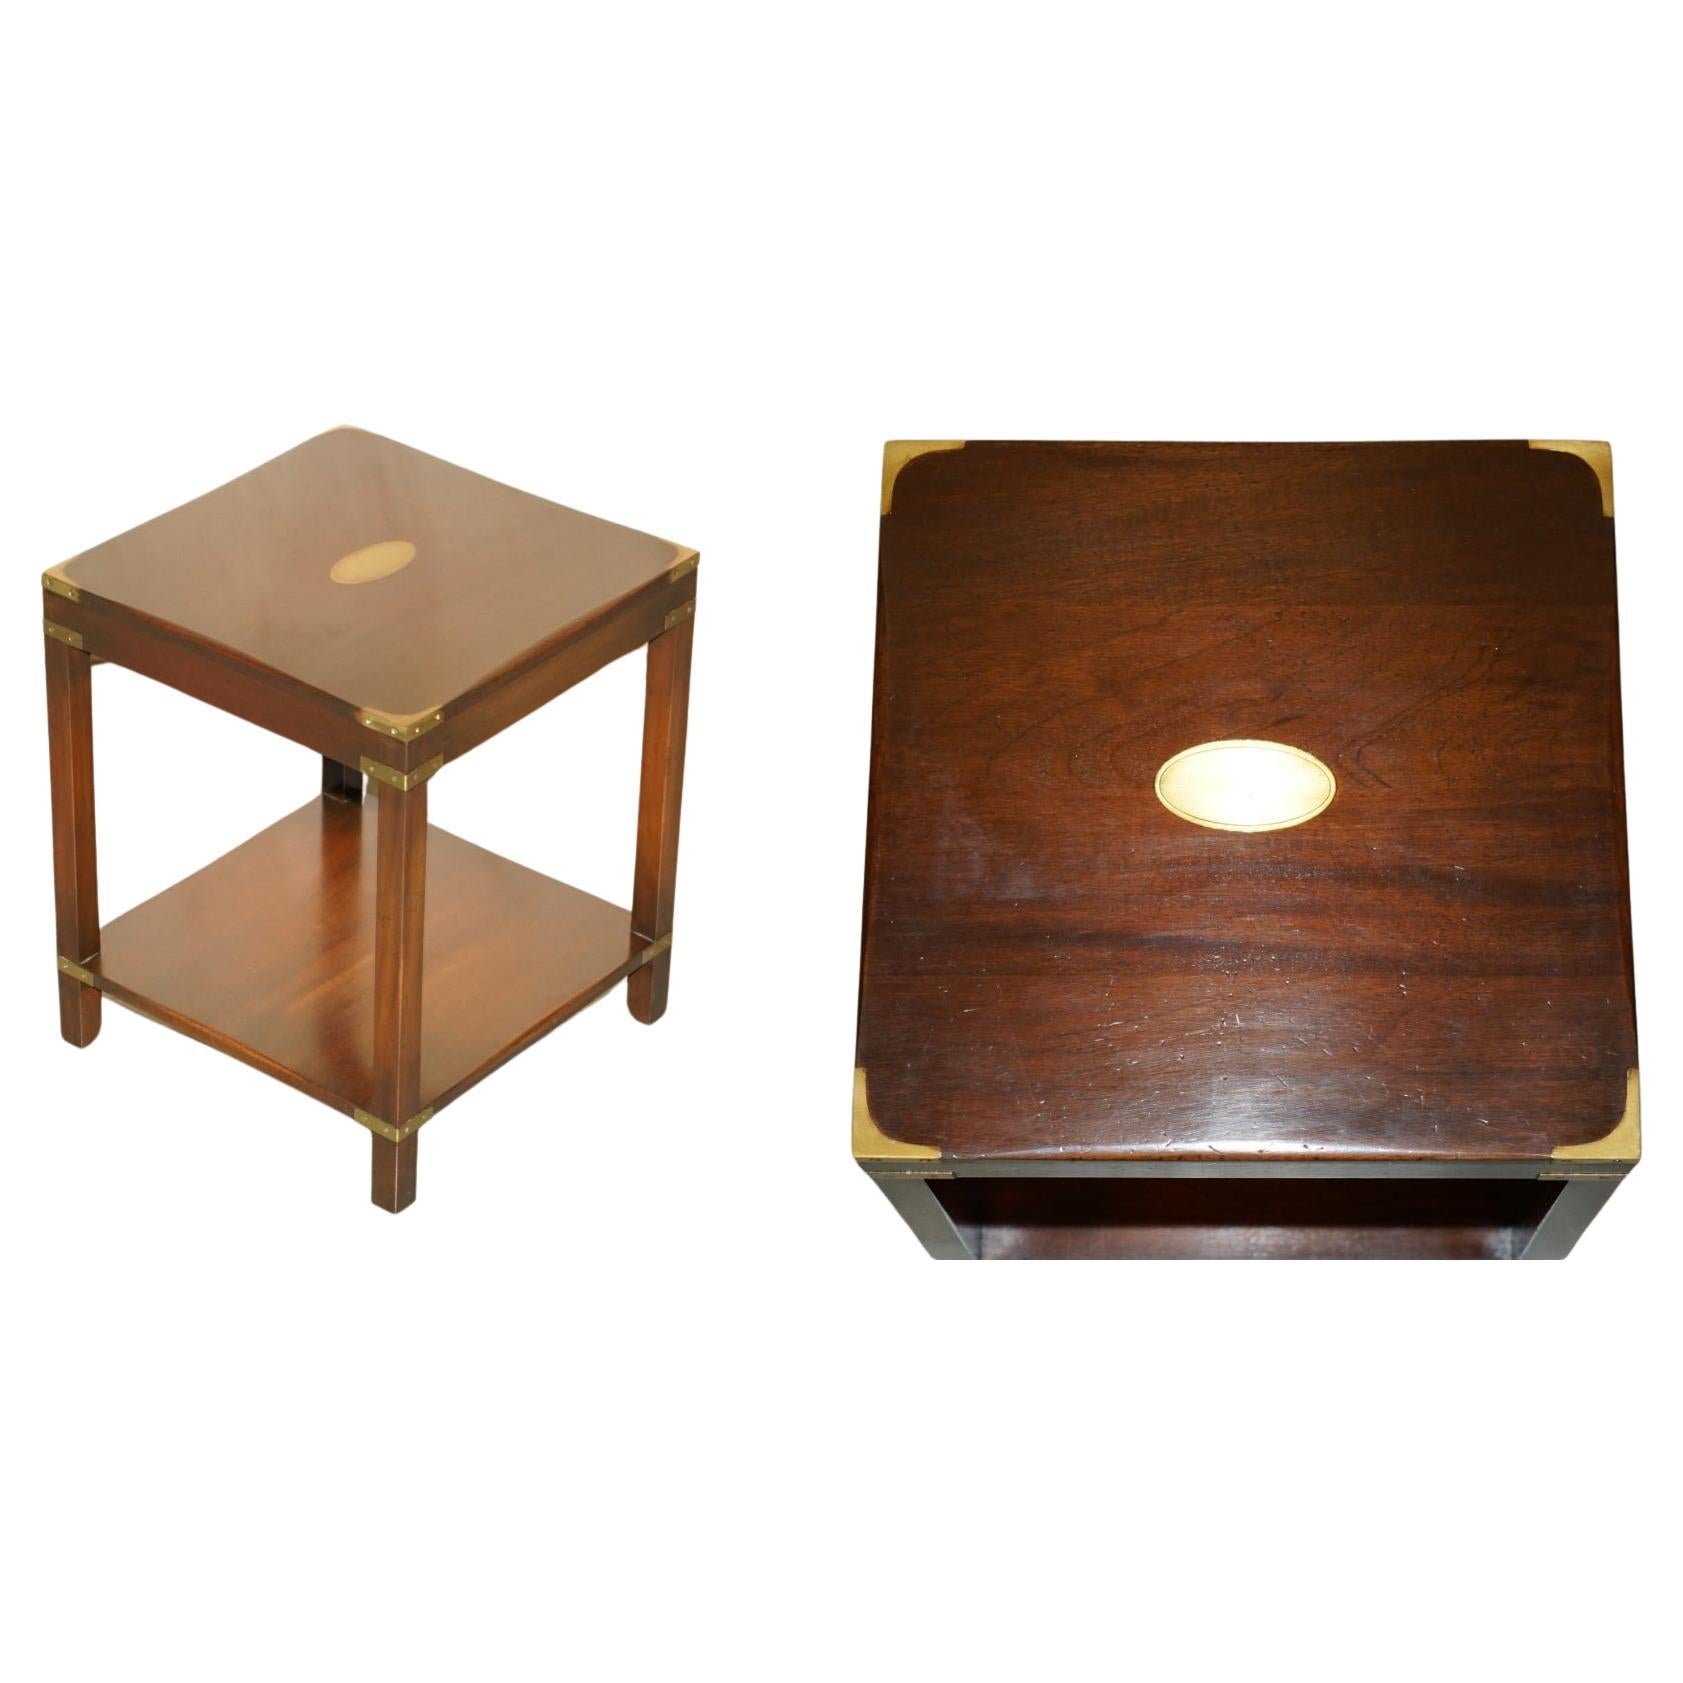 LUXURY HARRODS LONDON KENNEDY MILITARY CAMPAIGN HiGH SIDE END TABLE HARDWOOD For Sale